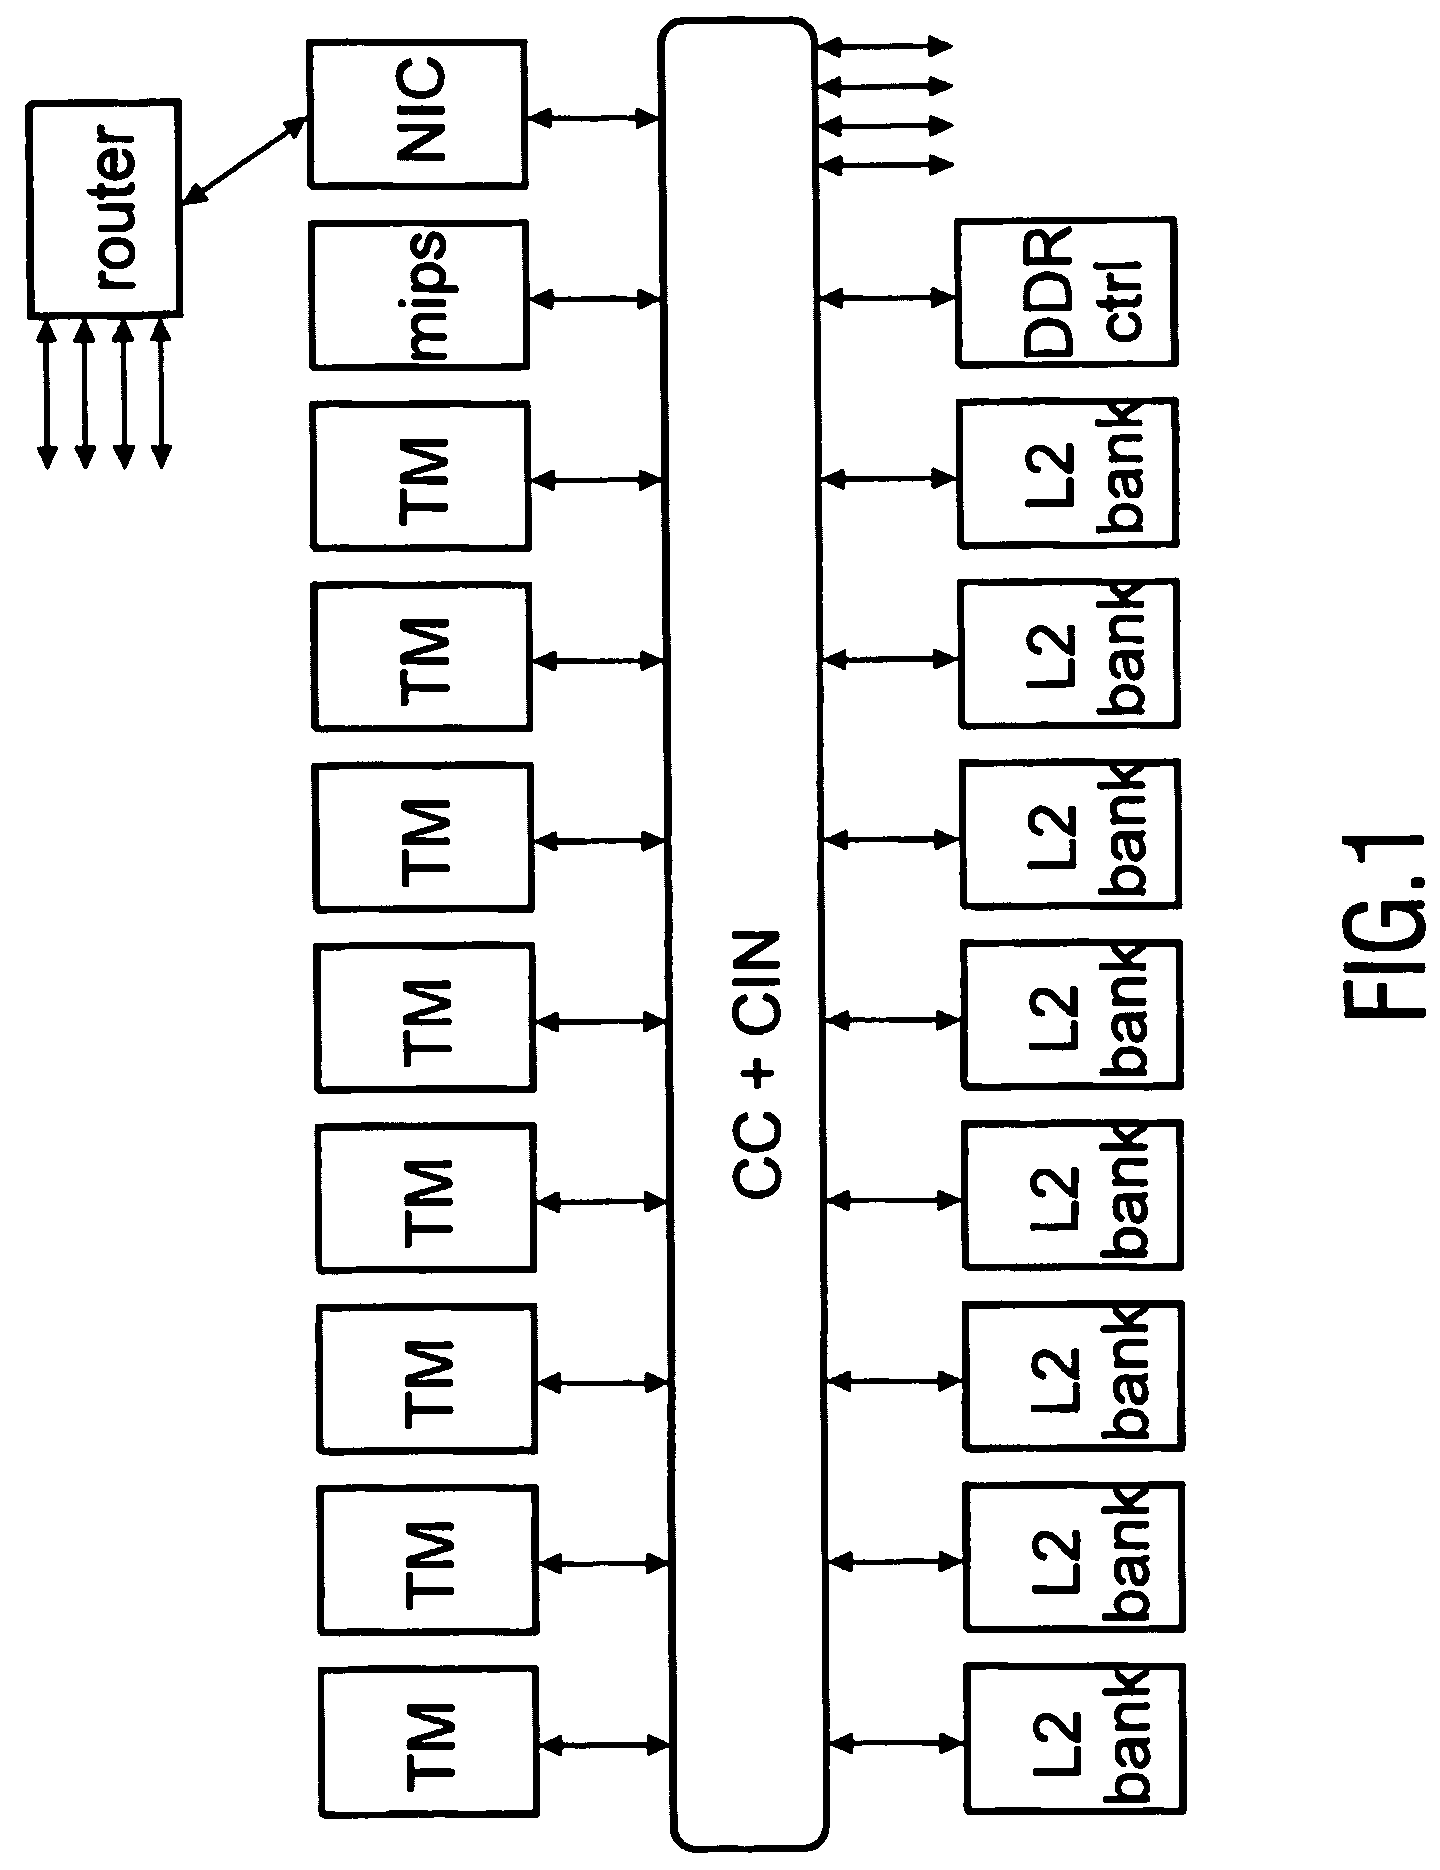 Intergrated circuit and a method of cache remapping